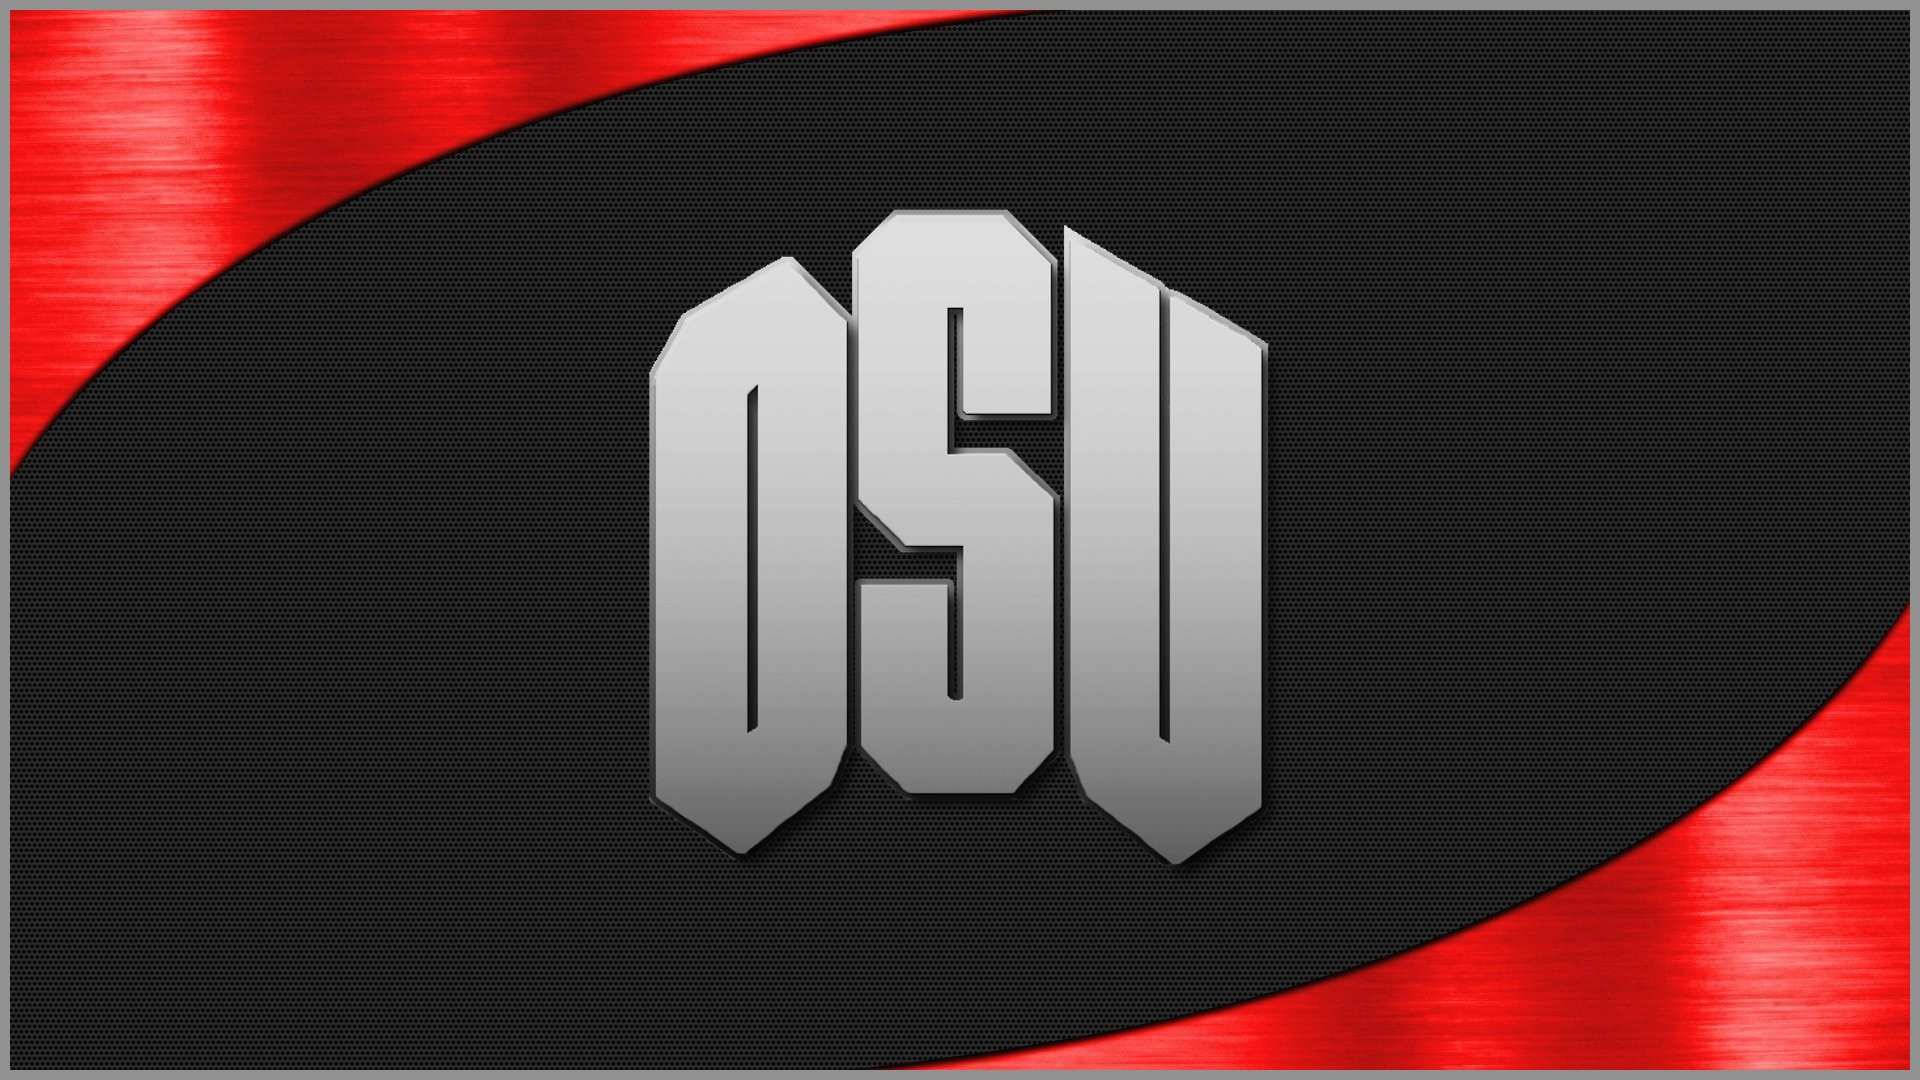 1920X1080 Ohio State Wallpaper and Background